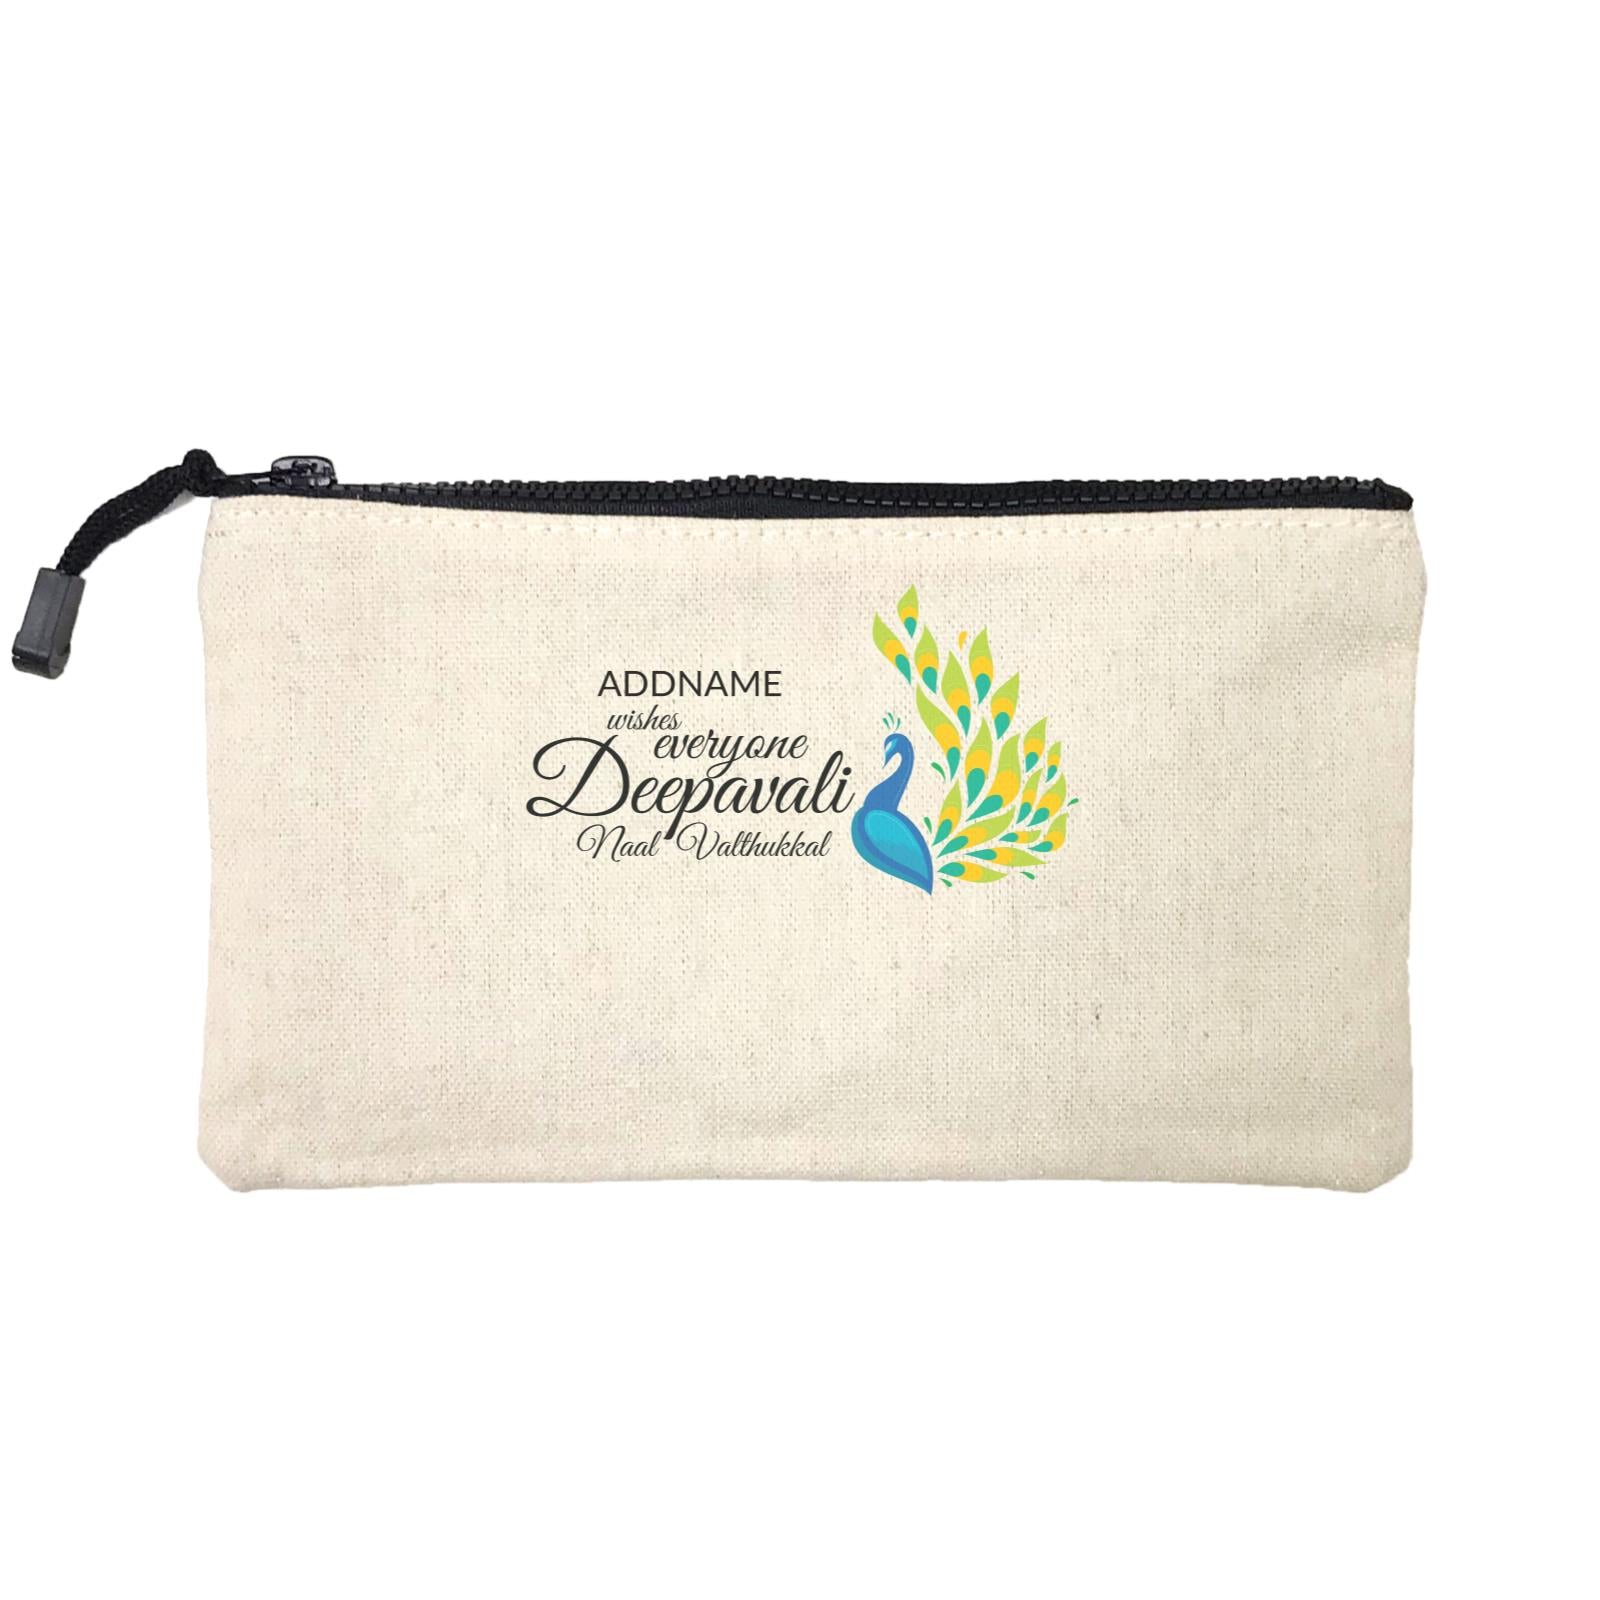 Deepavali Peacock Wishes everyone Deepavali Naal Valthukkal Addname Mini Accessories Stationery Pouch